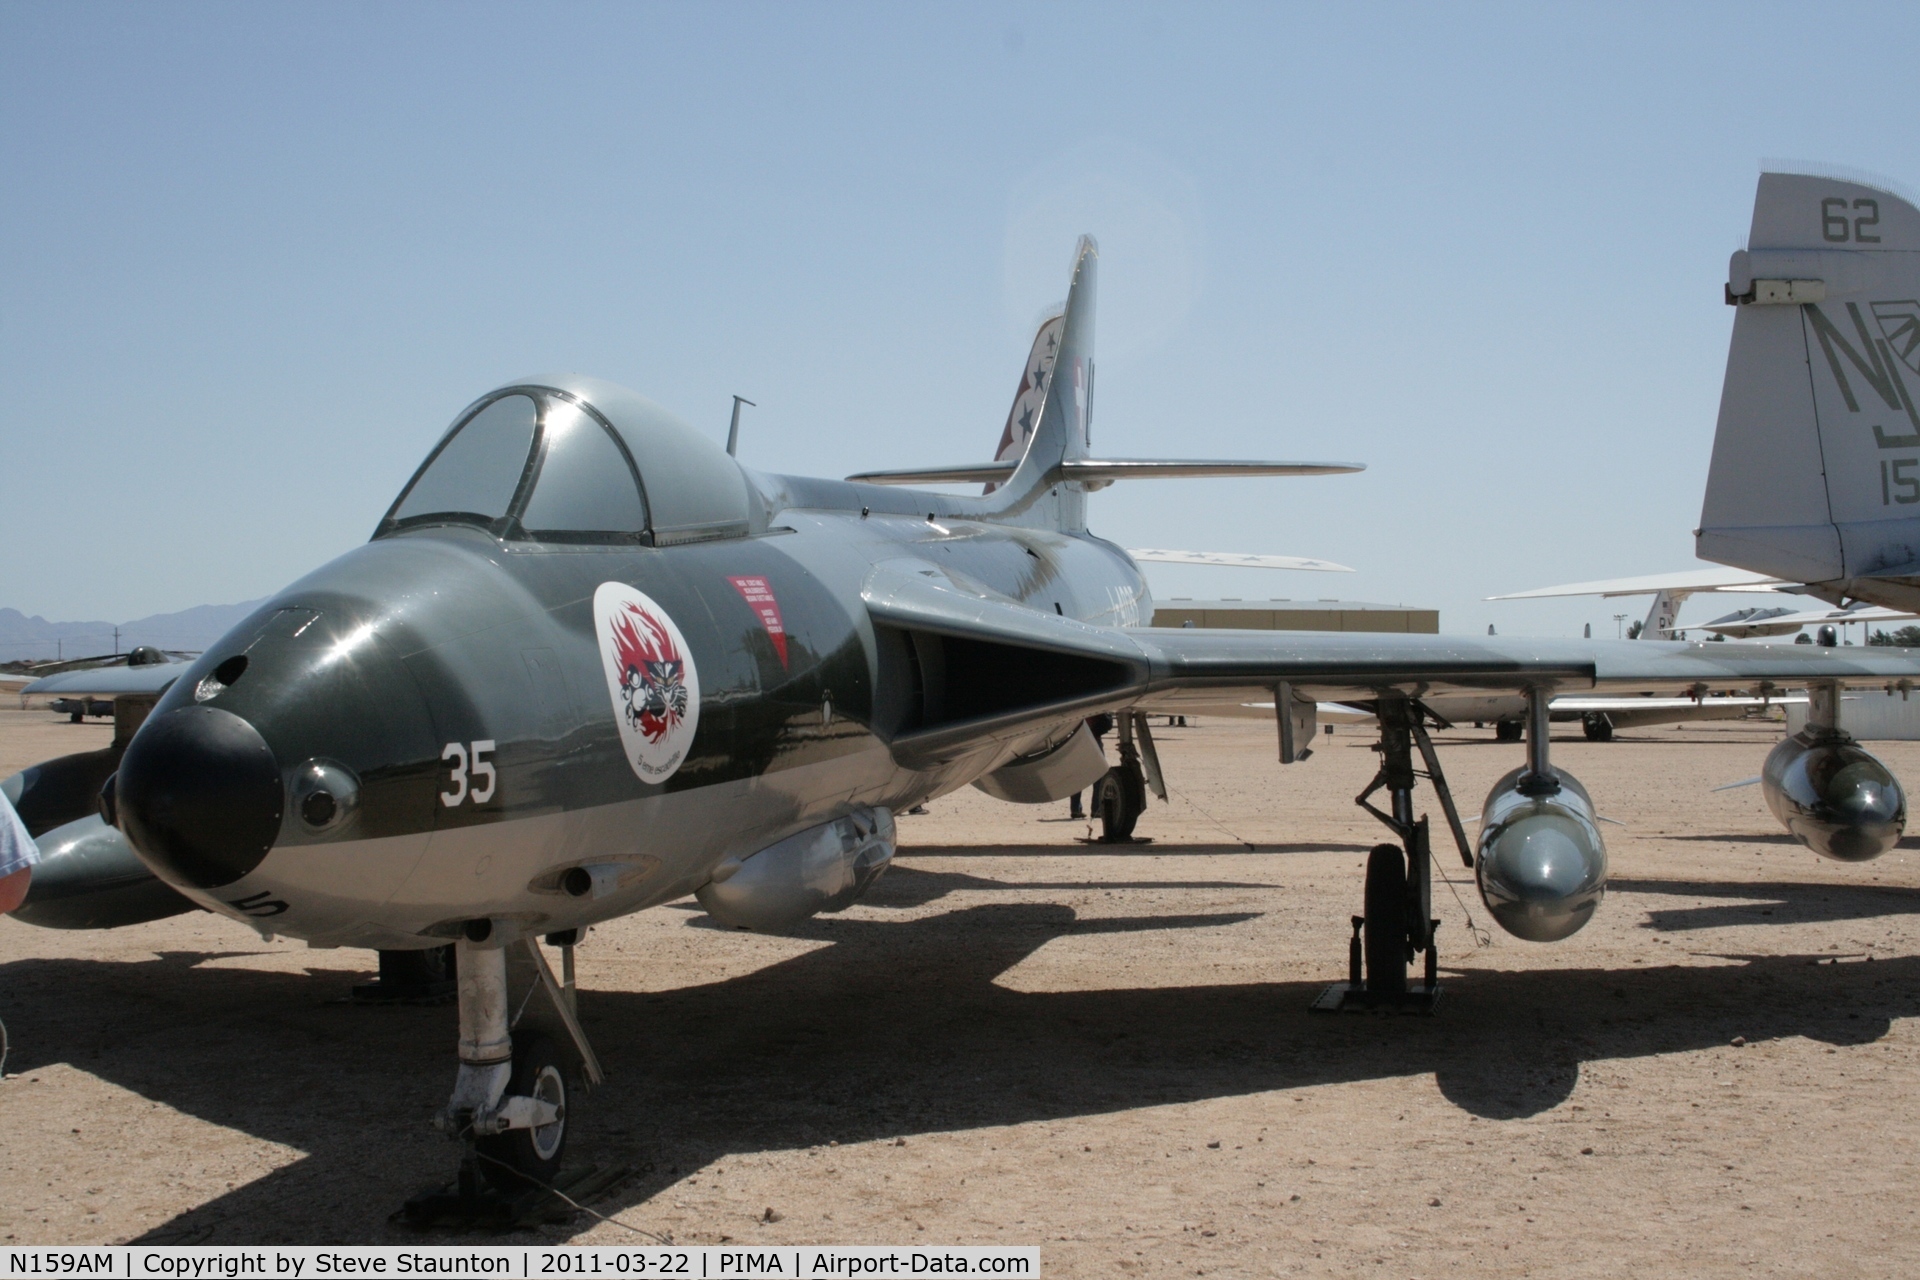 N159AM, Hawker Hunter F.58 C/N 41H-697402, Taken at Pima Air and Space Museum, in March 2011 whilst on an Aeroprint Aviation tour